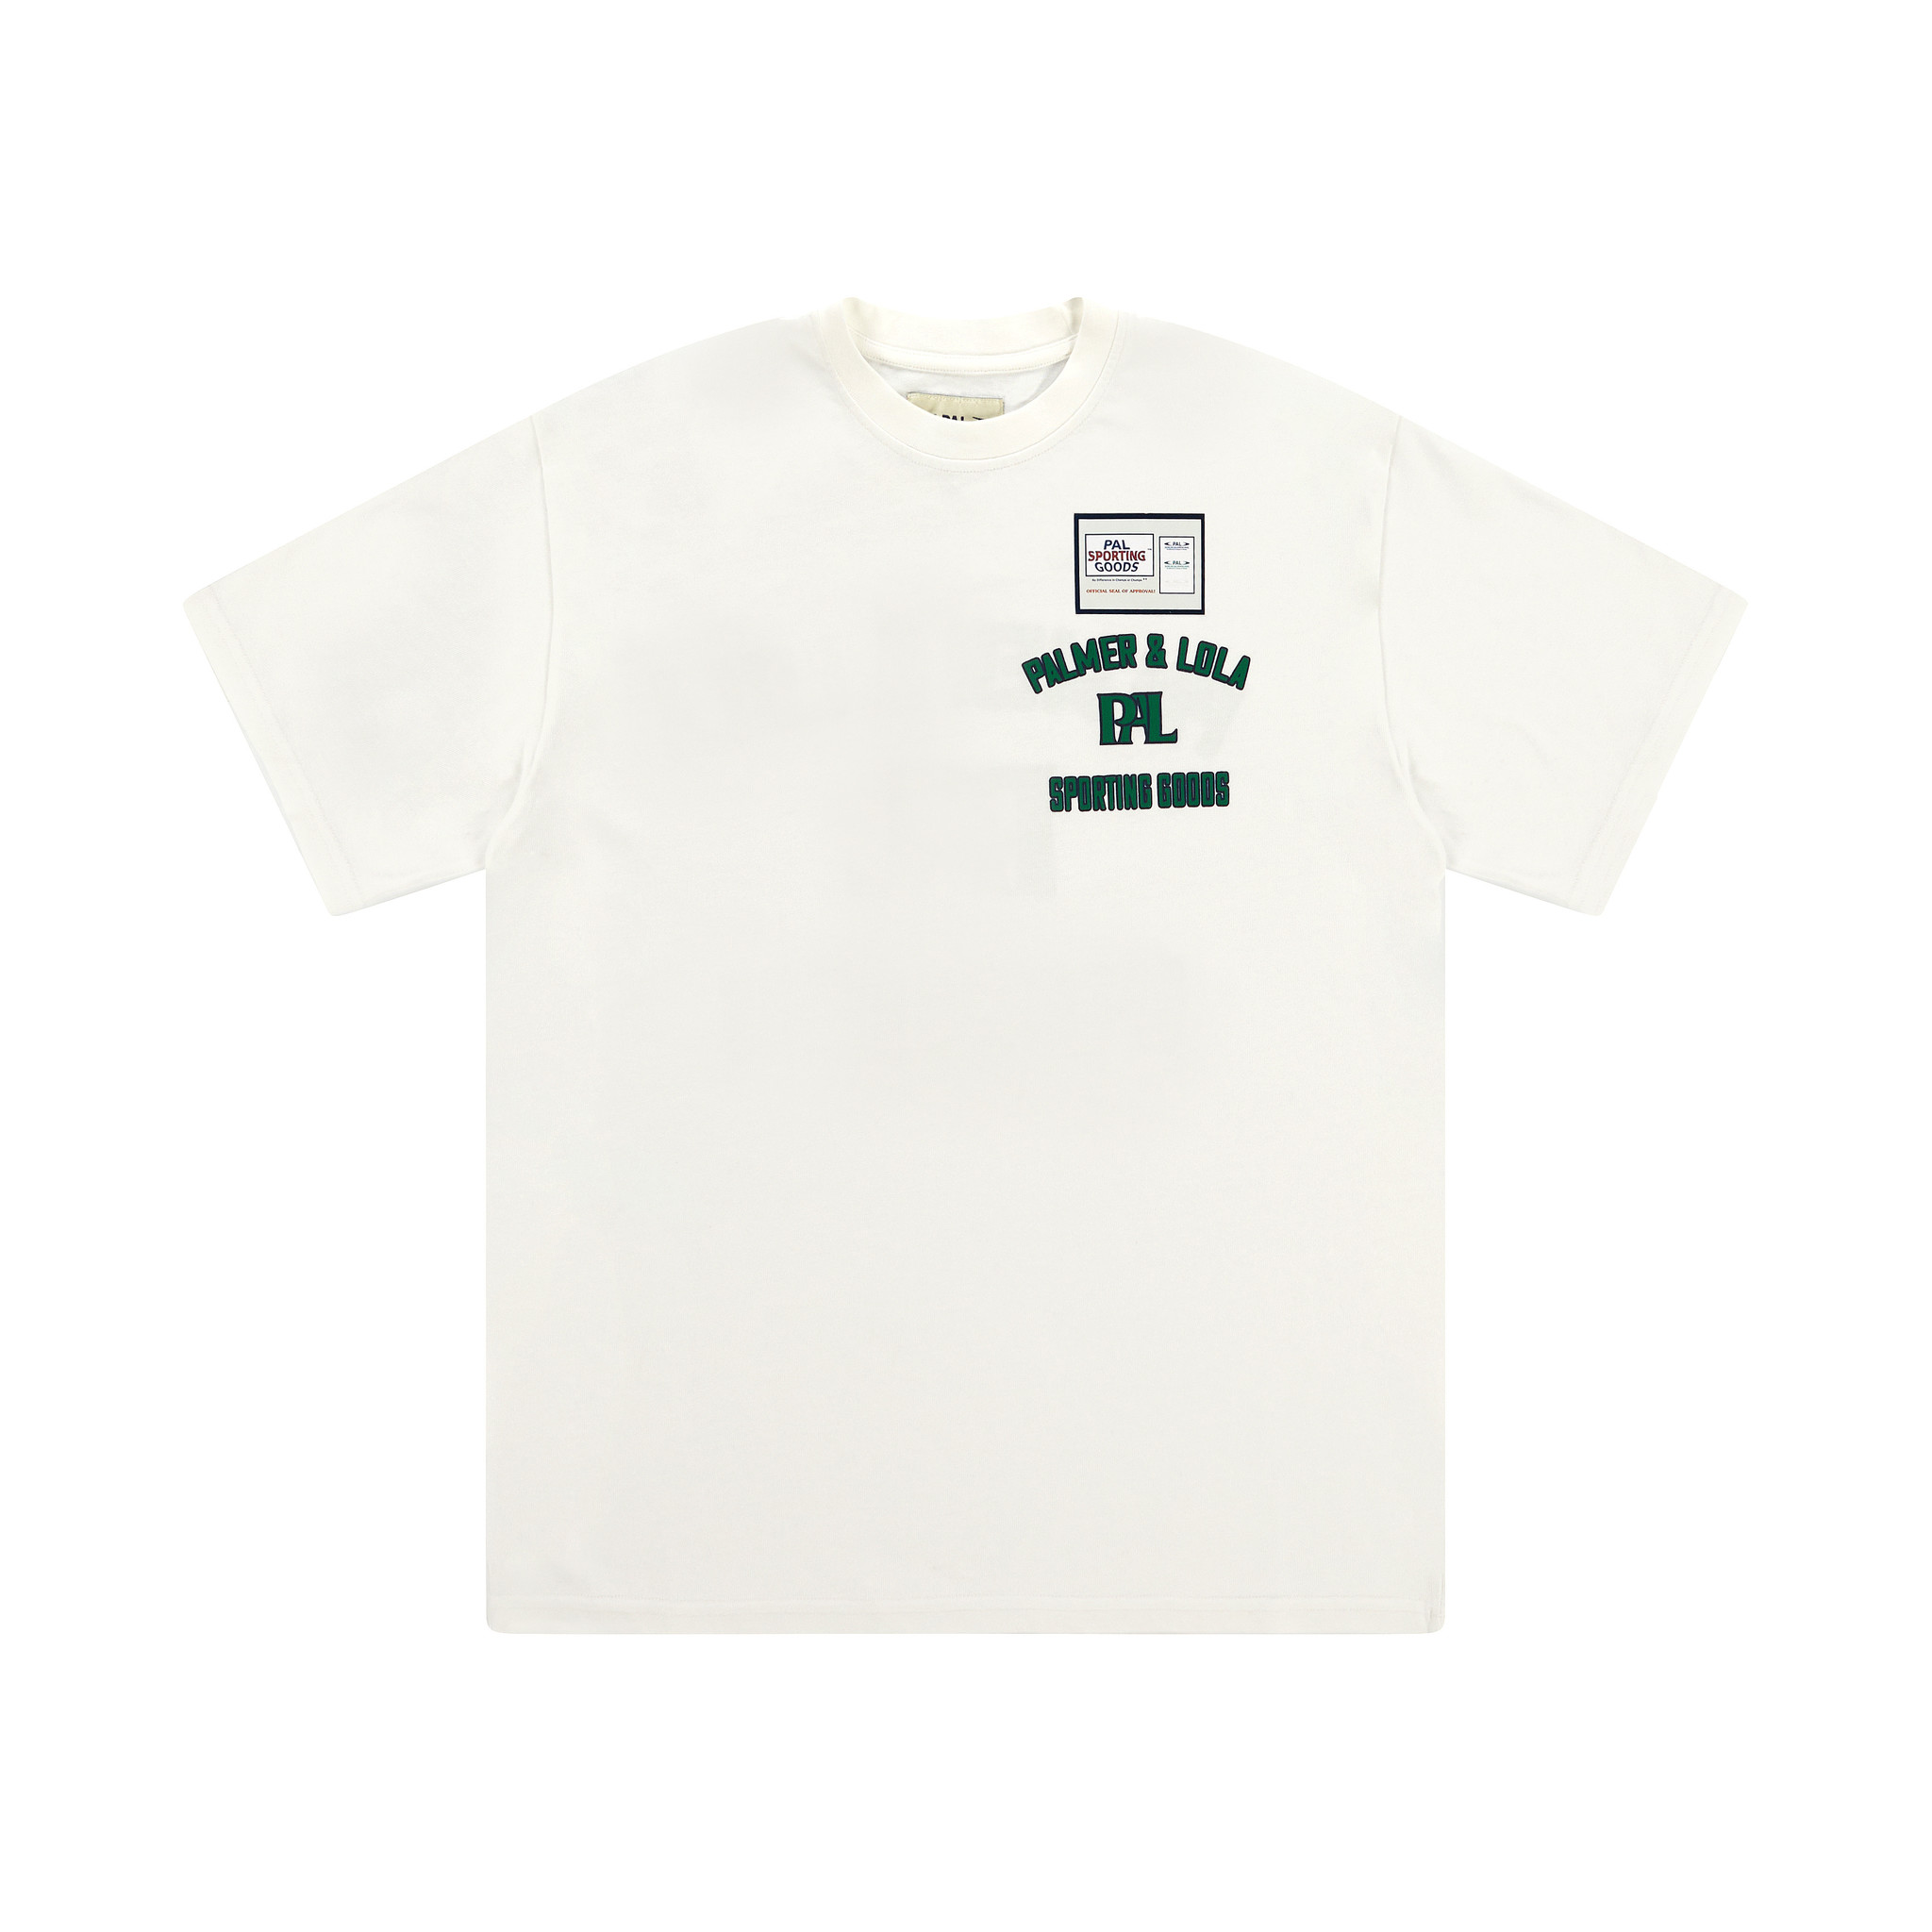 New Arch Logo T-Shirt Antique White - PAL Sporting goods